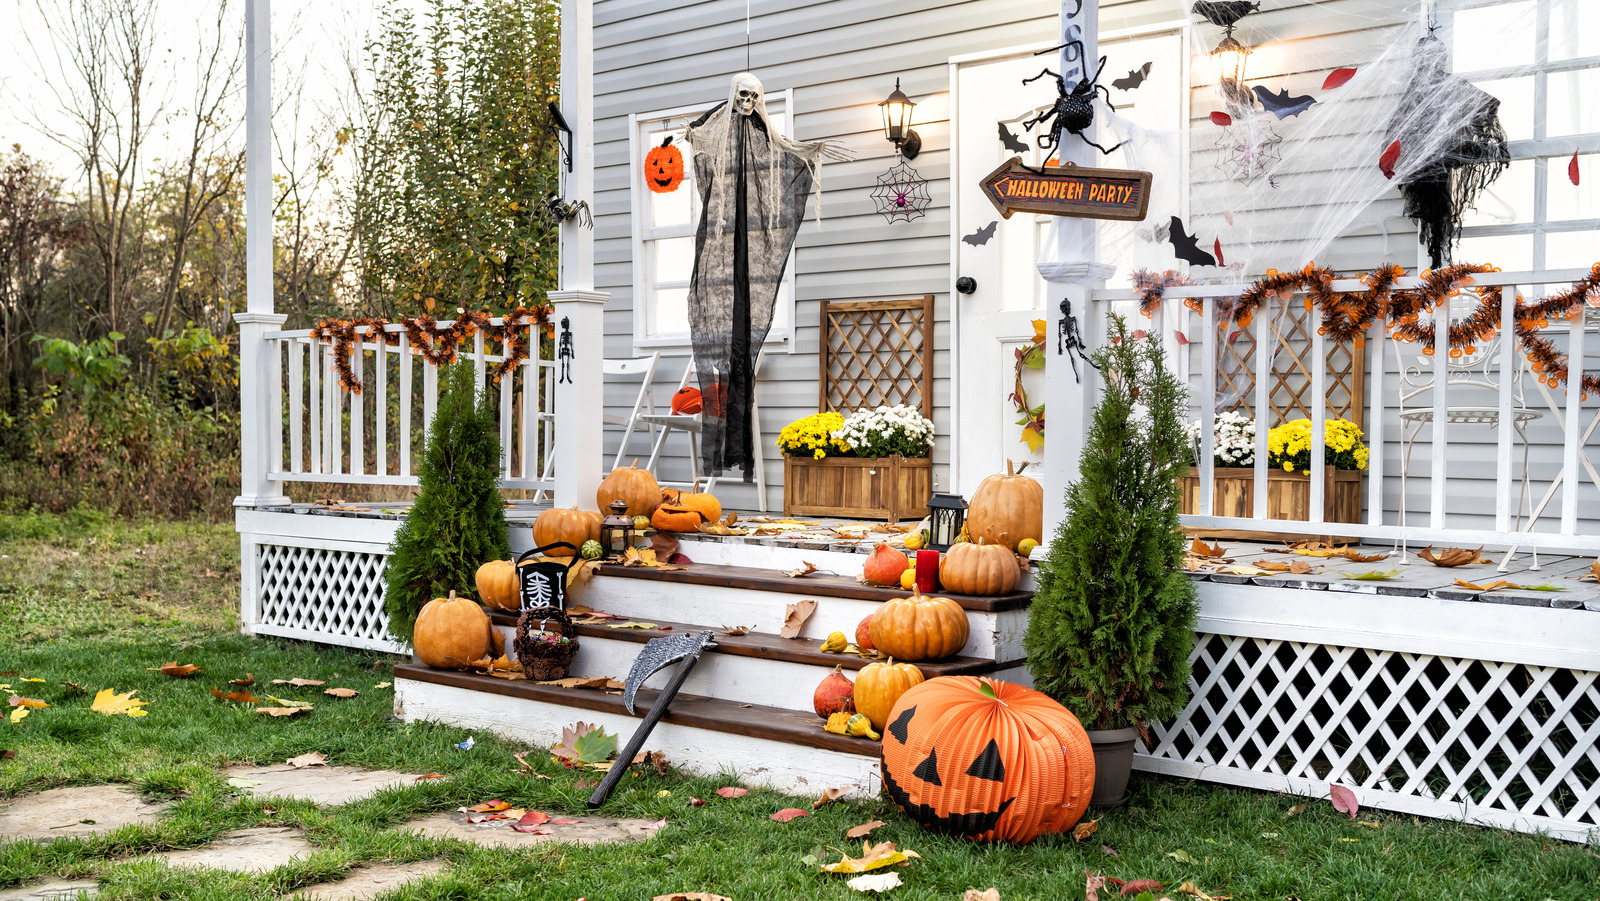 https://www.housedigest.com/img/gallery/transform-your-cheap-plastic-pumpkins-into-the-perfect-fall-porch-decor-with-tiktoks-diy/l-intro-1696532459.jpg